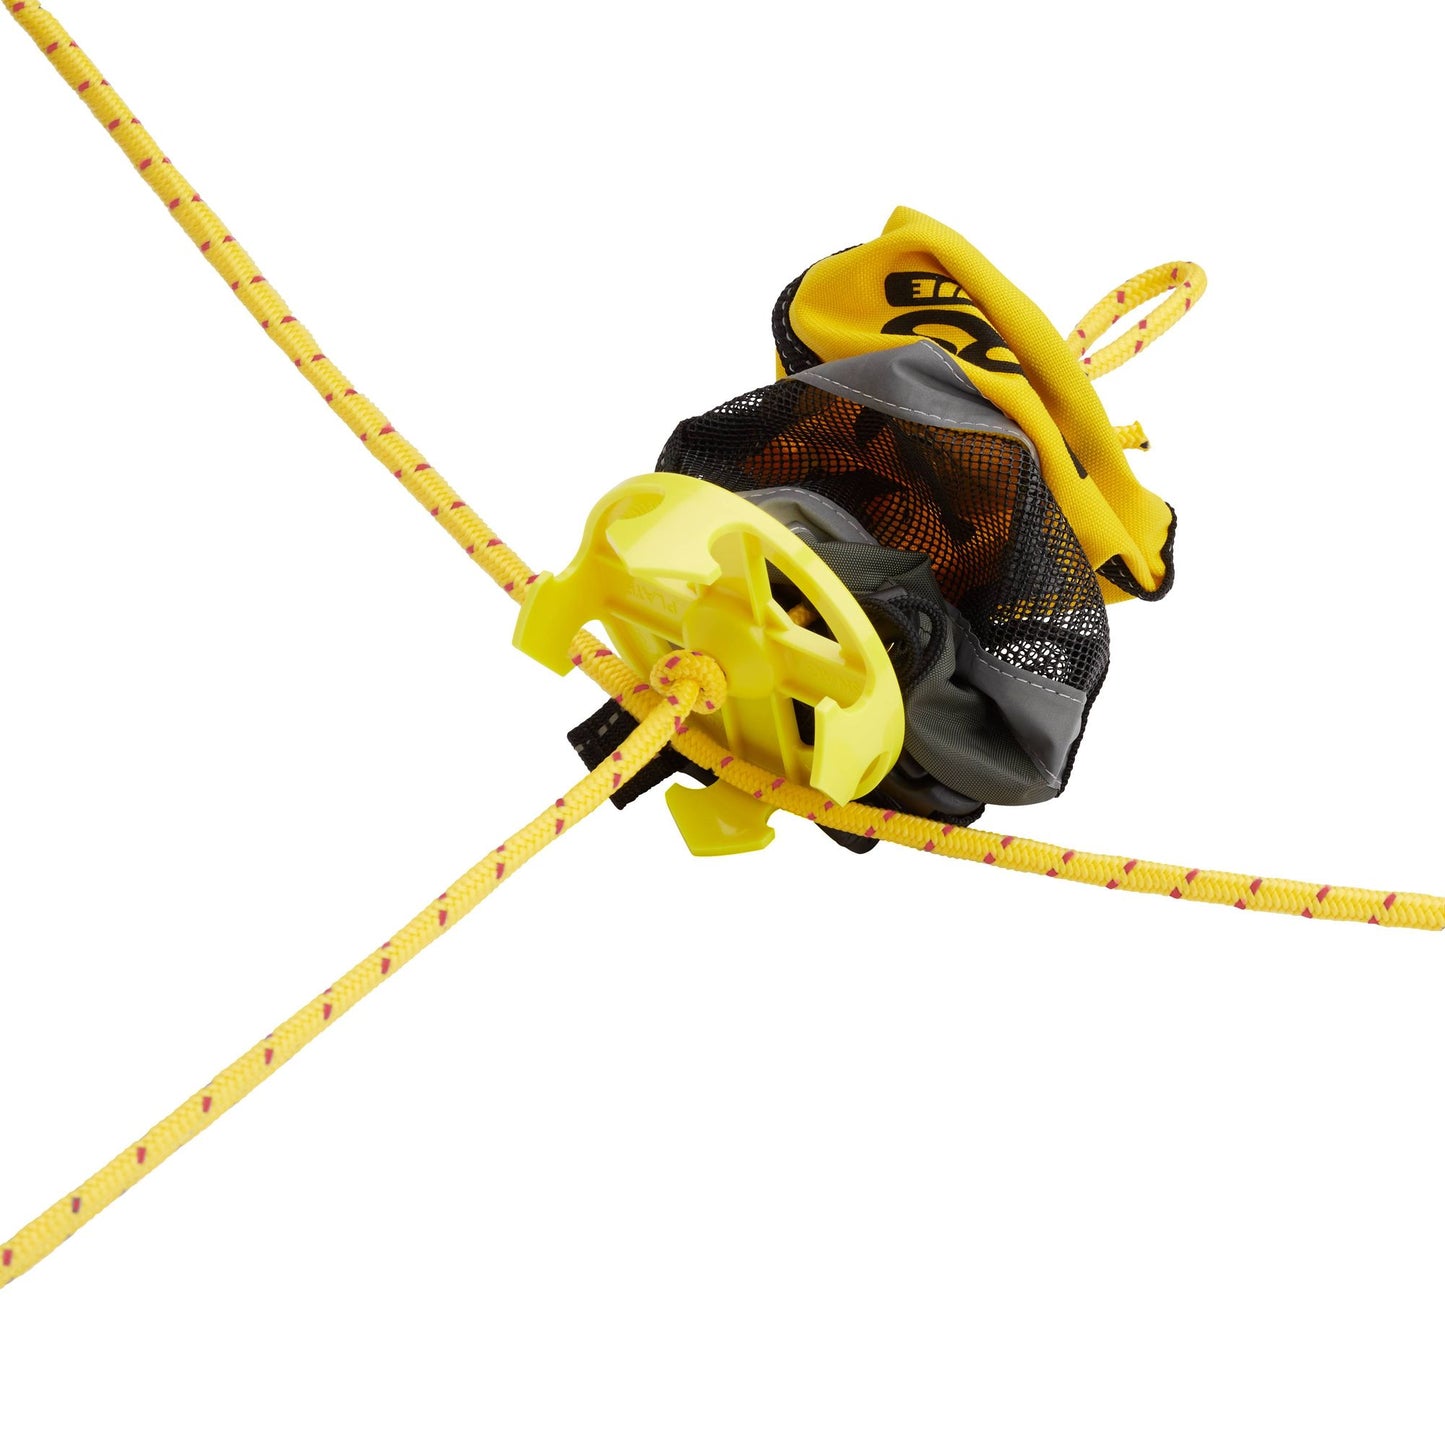 A yellow rope attached to a NRS Wild Water Snag Plate helmet for retrieval situations in wild water.